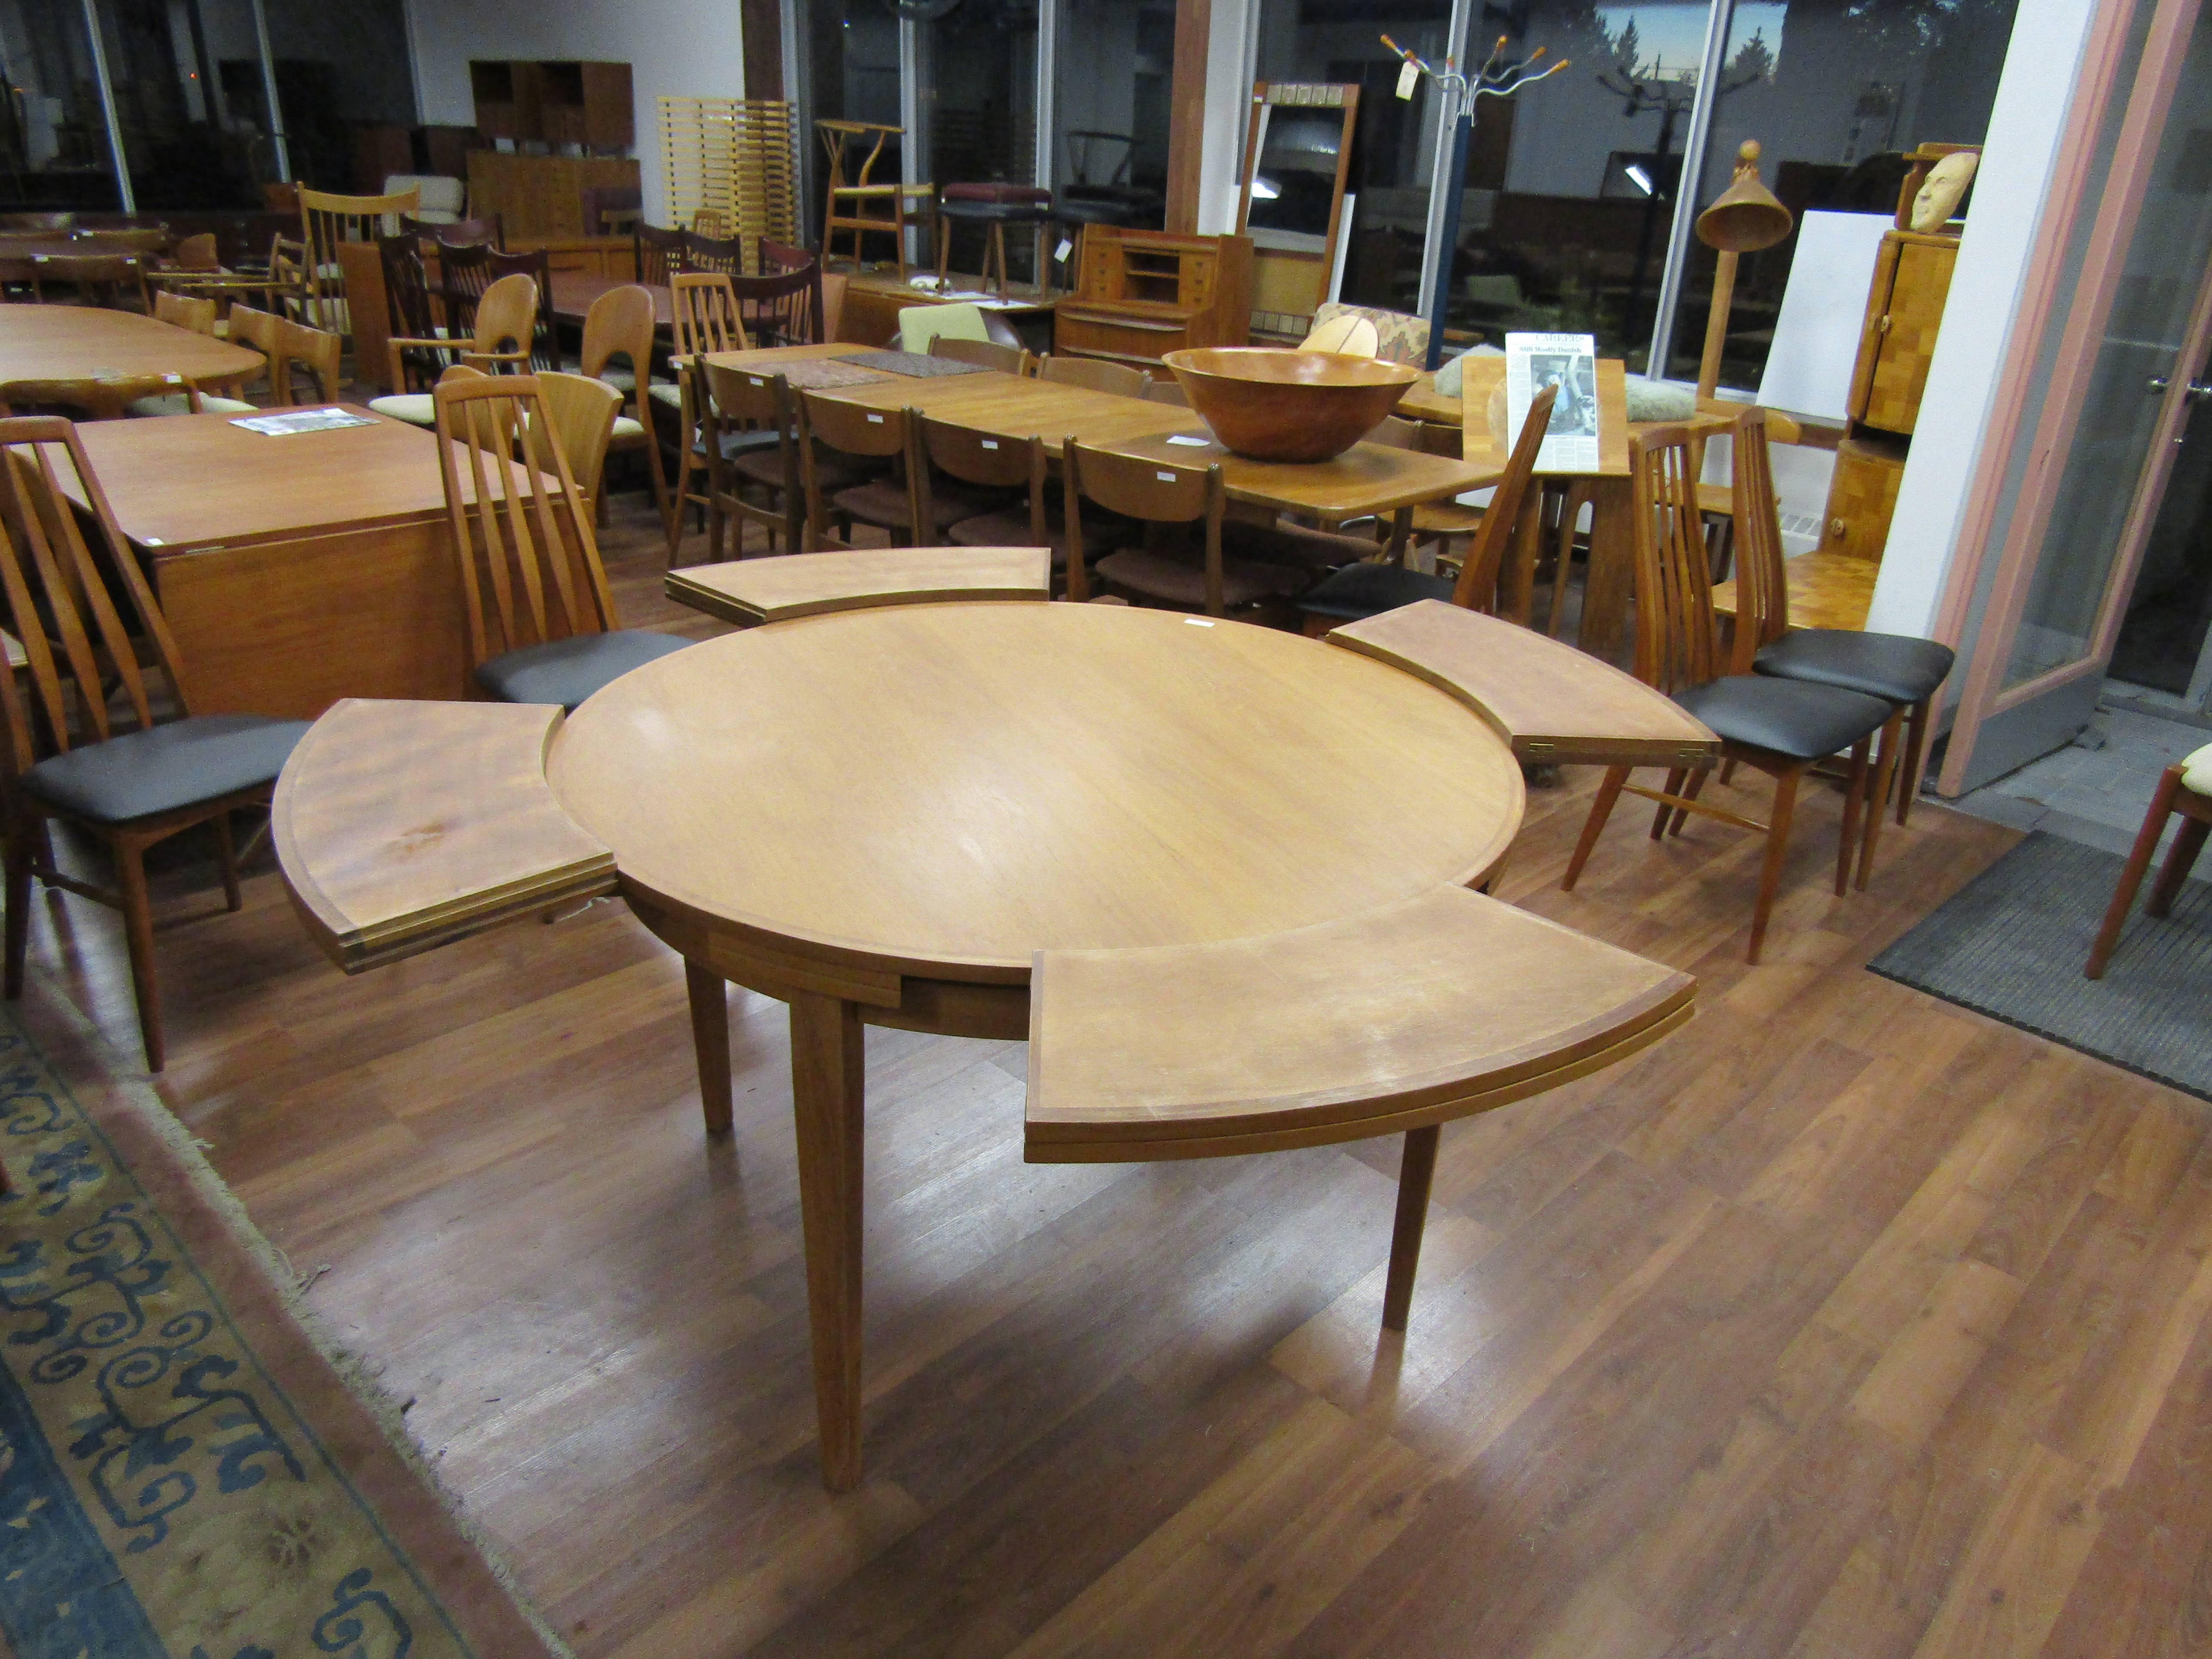 Mid-20th Century Kofoed Teak Flip Flap Dining Table from Denmark For Sale